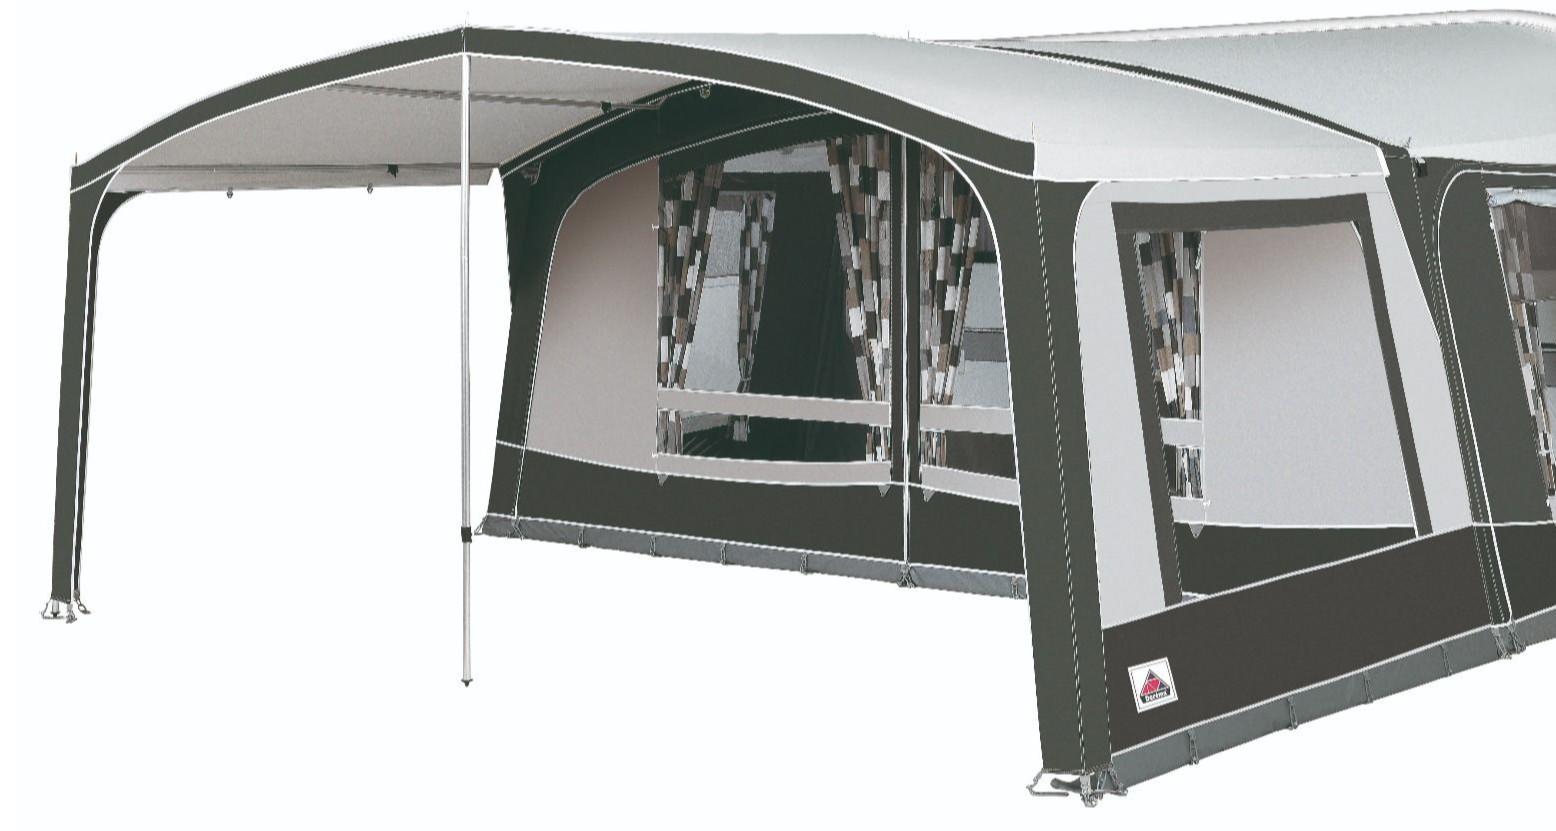 dorema octavia awning sun canopy side panel in-fill 2022 collection